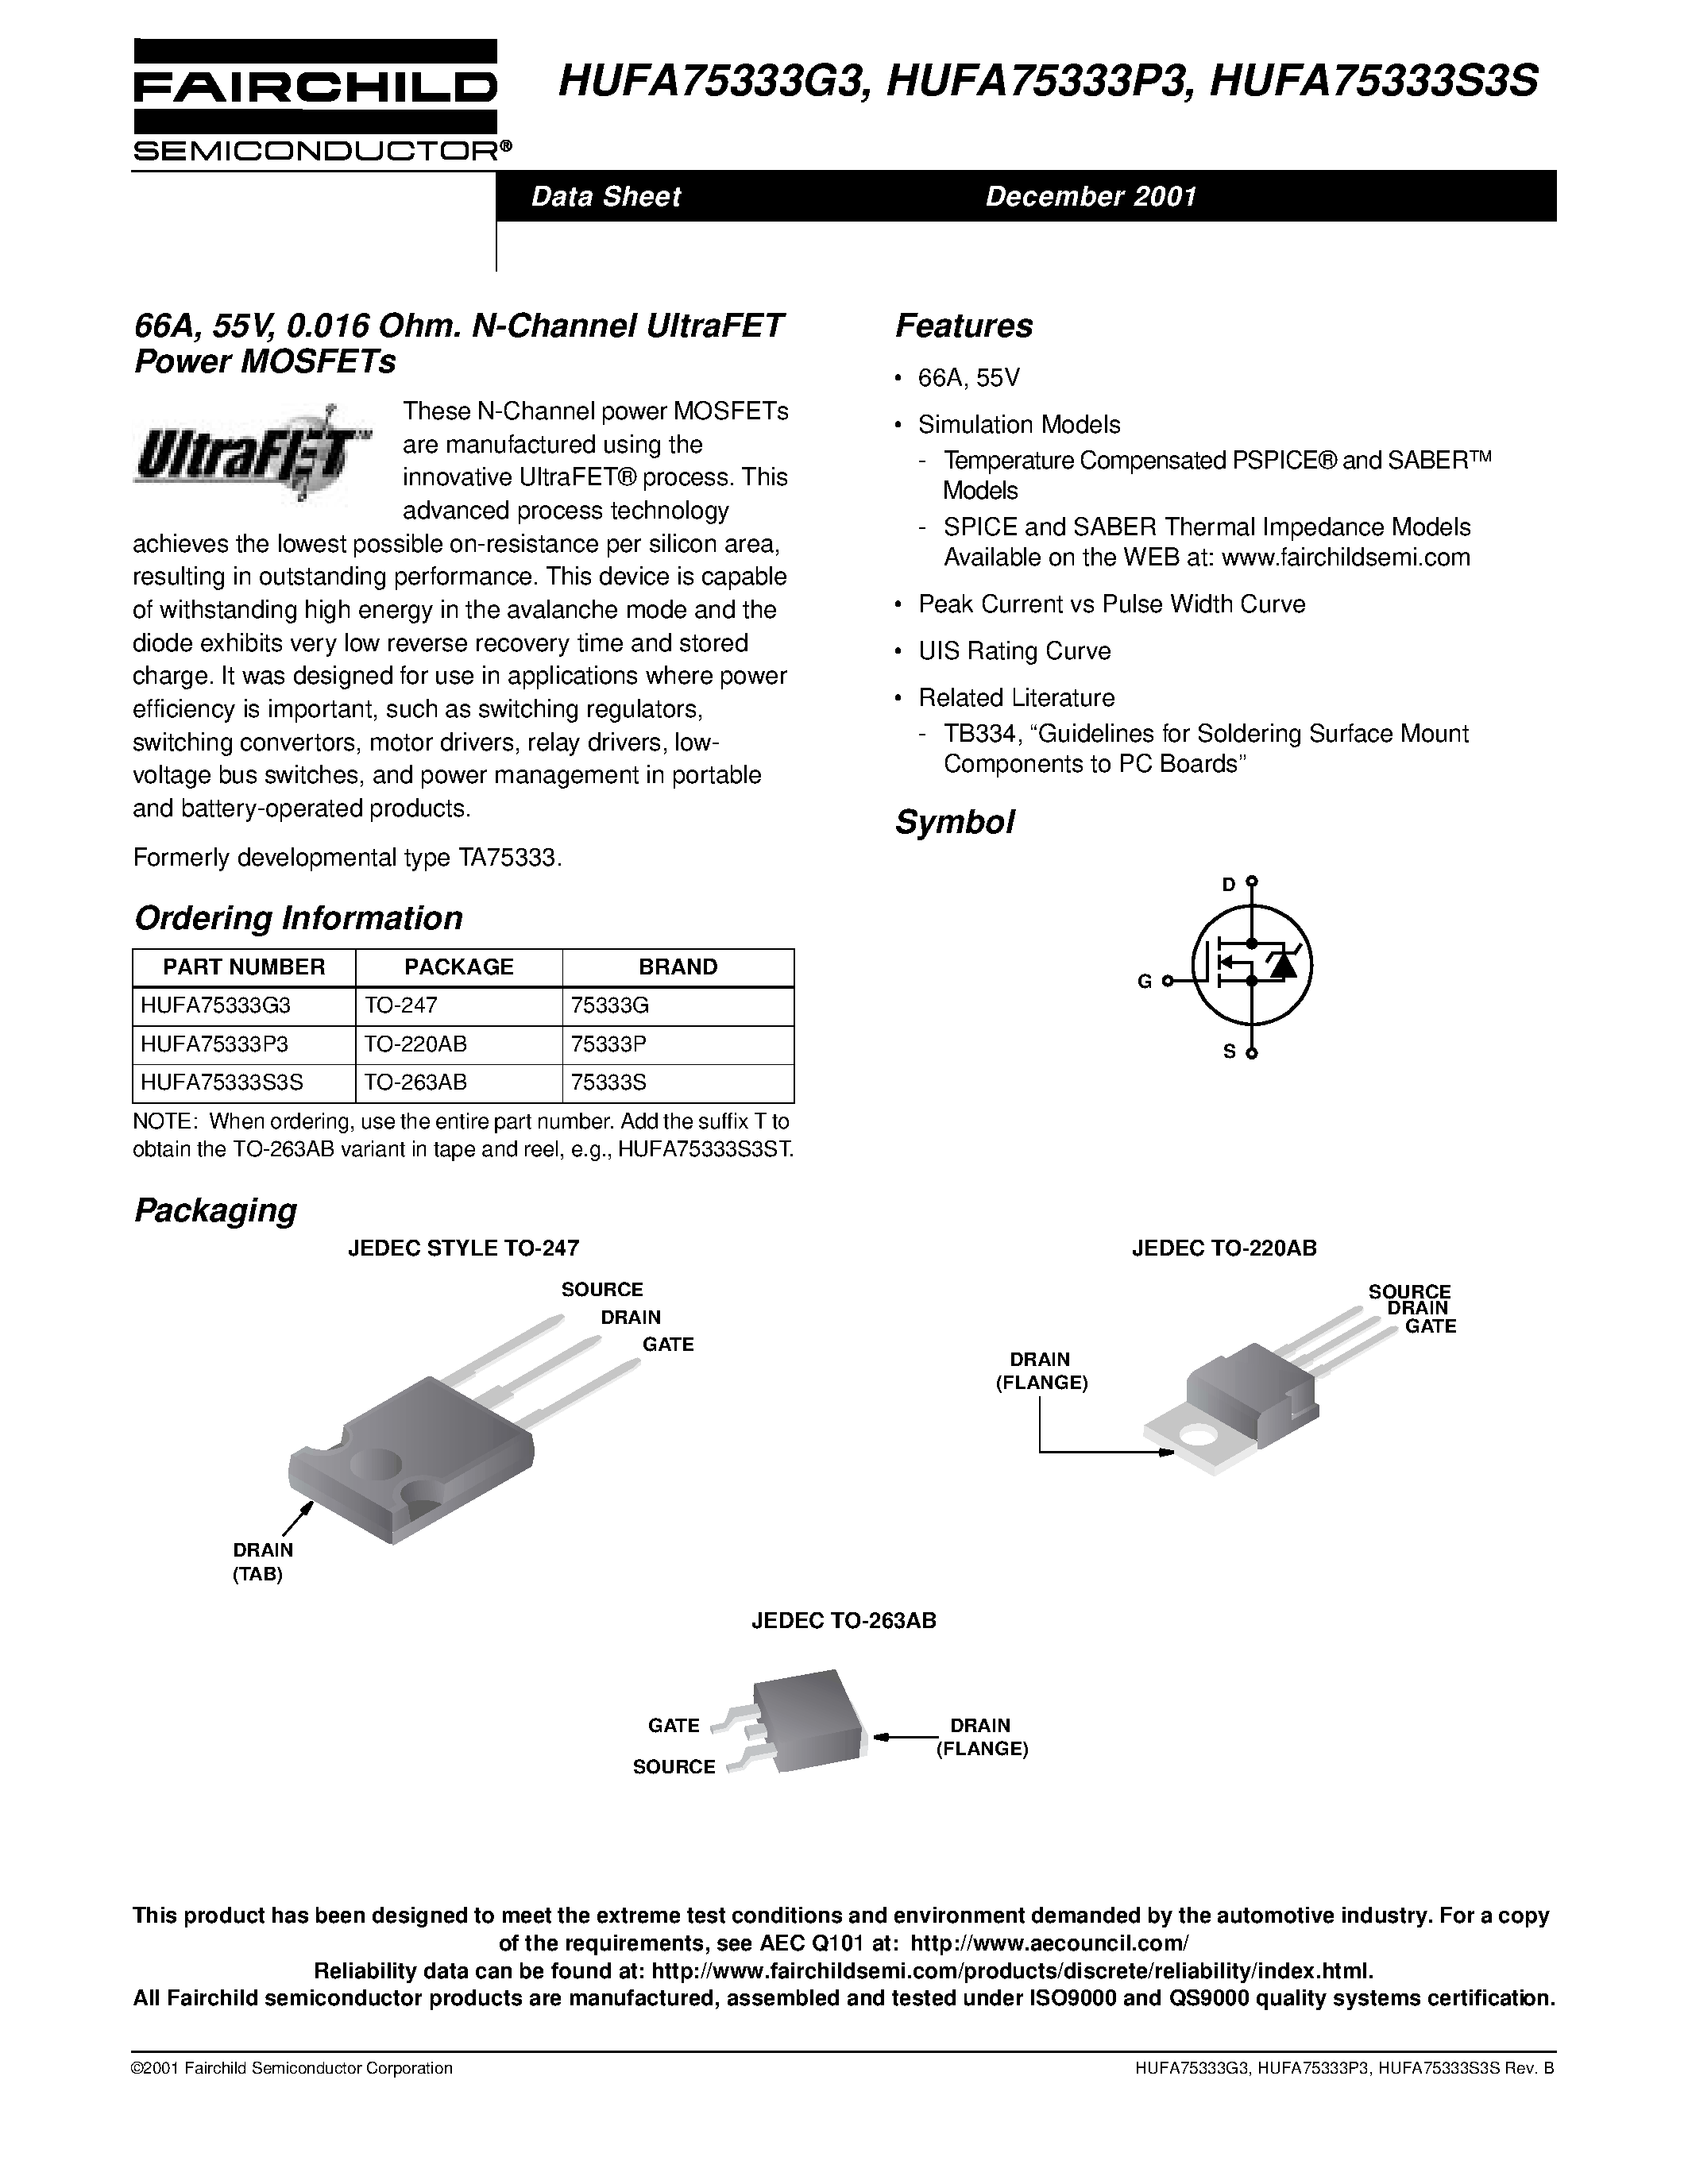 Datasheet HUFA75332G3 - 60A/ 55V/ 0.019 Ohm/ N-Channel UltraFET Power MOSFETs page 1